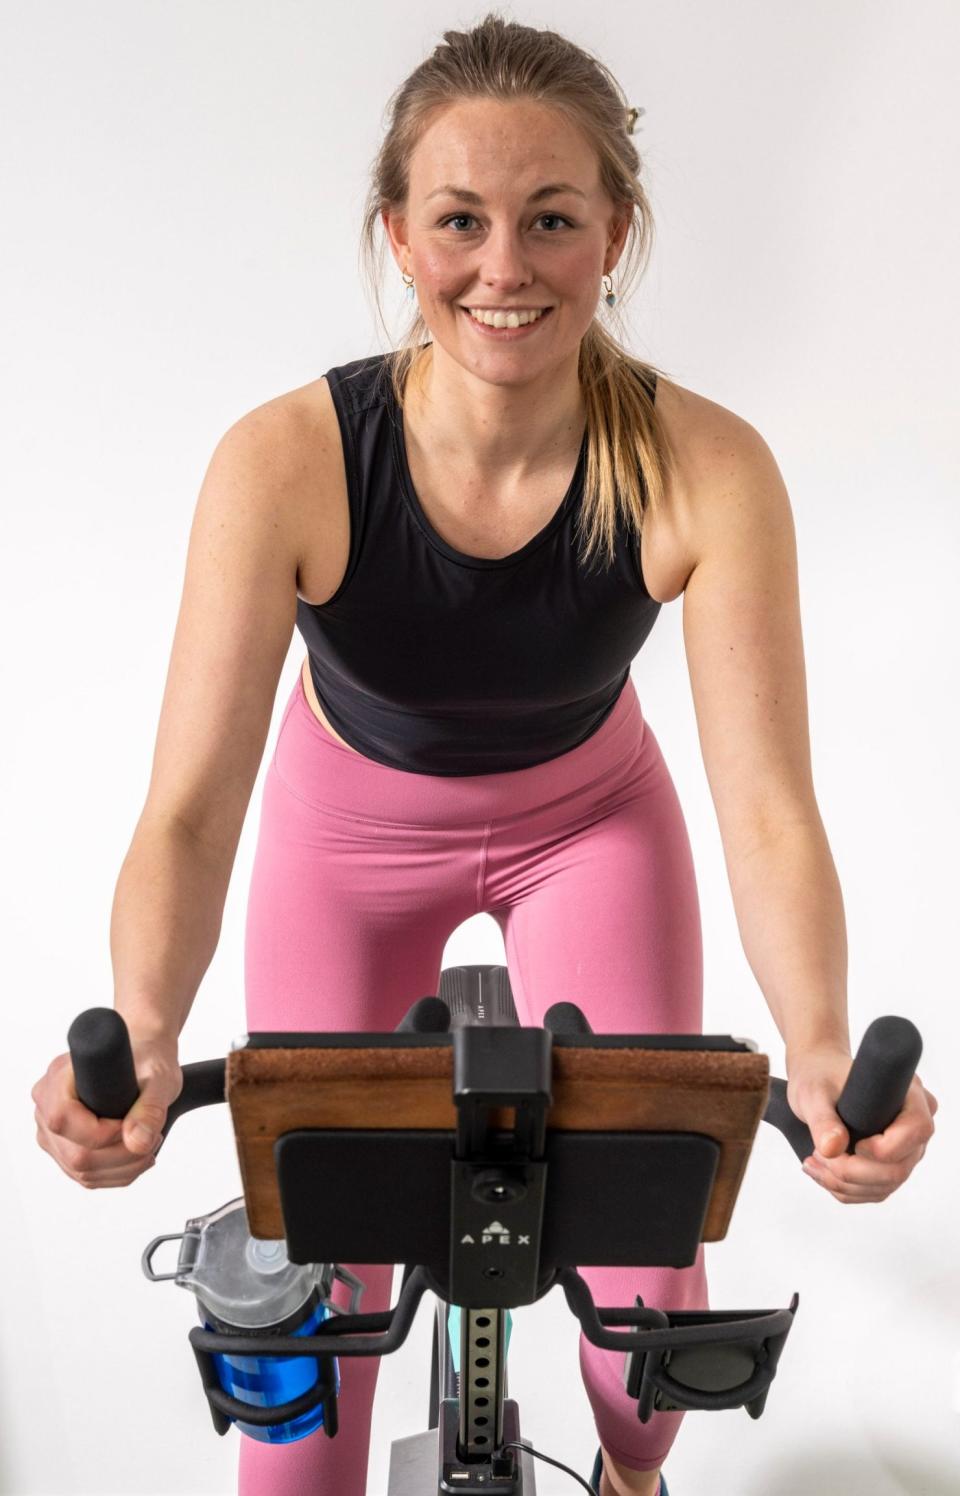 Maddi Howell on her Apex exercise bike - Andrew Crowley/The Telegraph